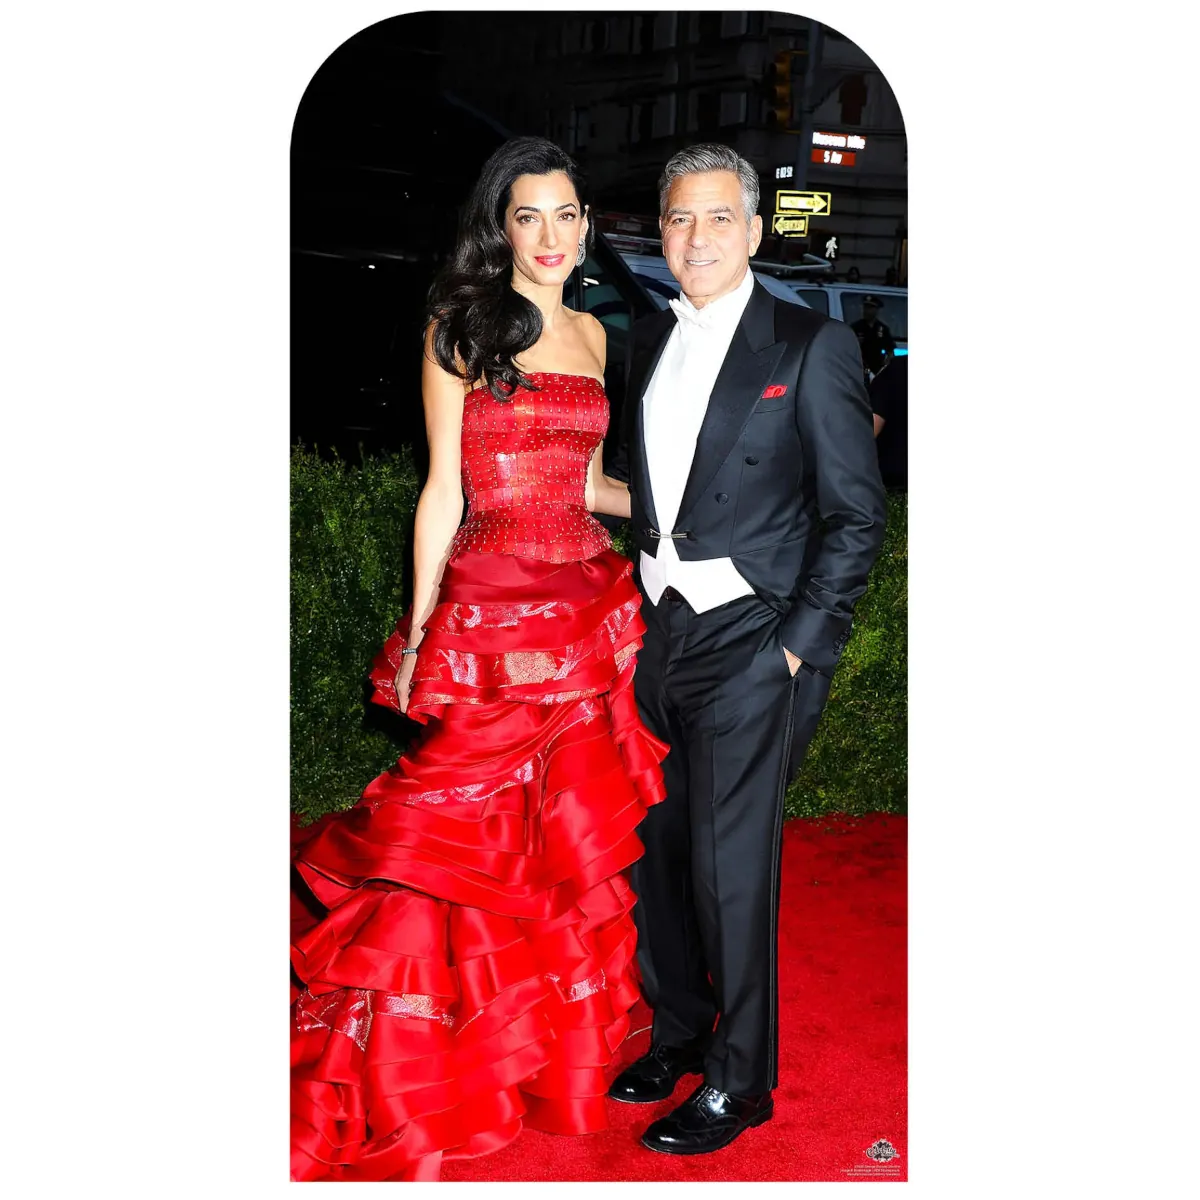 CS635 George Clooney 'Red Carpet' Lifesize Stand-In Cardboard Cutout Standee Front